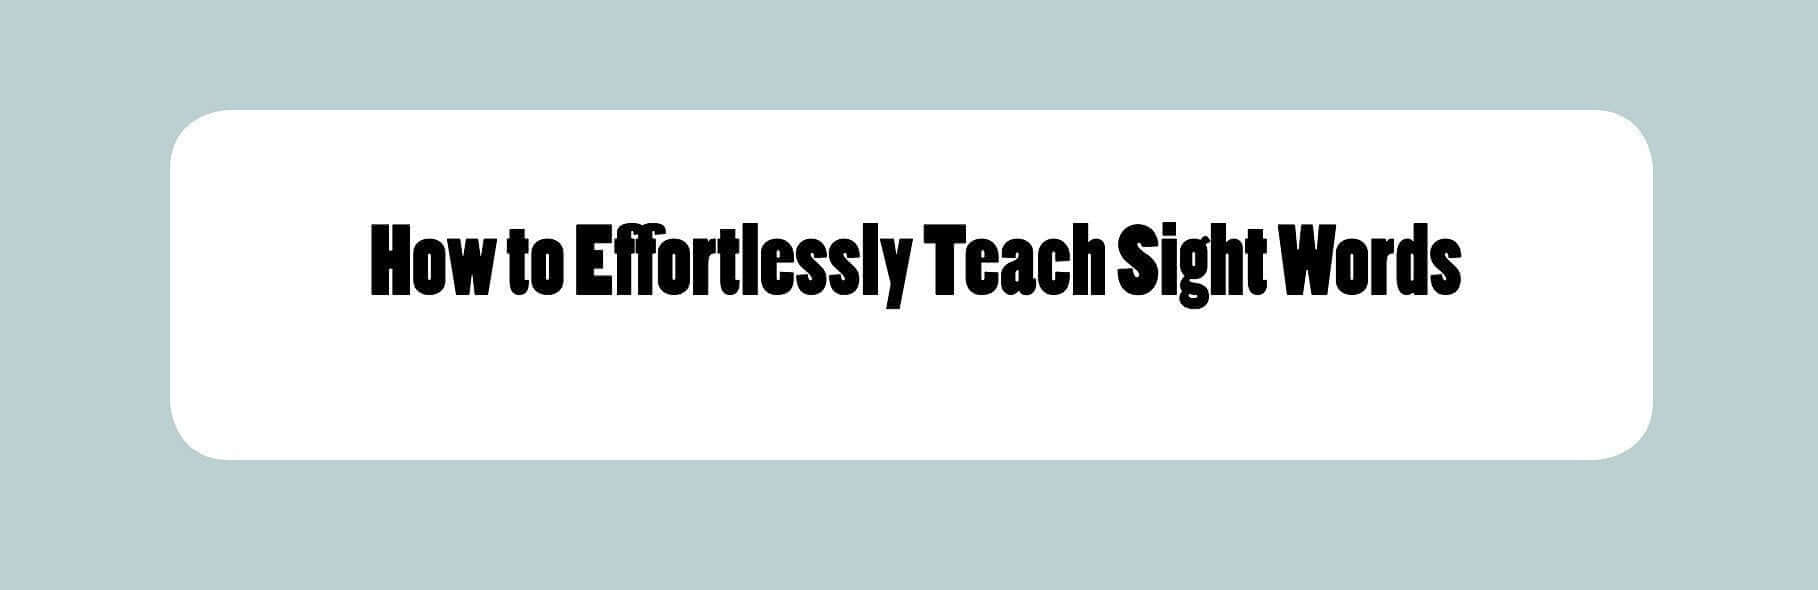 Infographic: How to Effortlessly Teach Sight Words